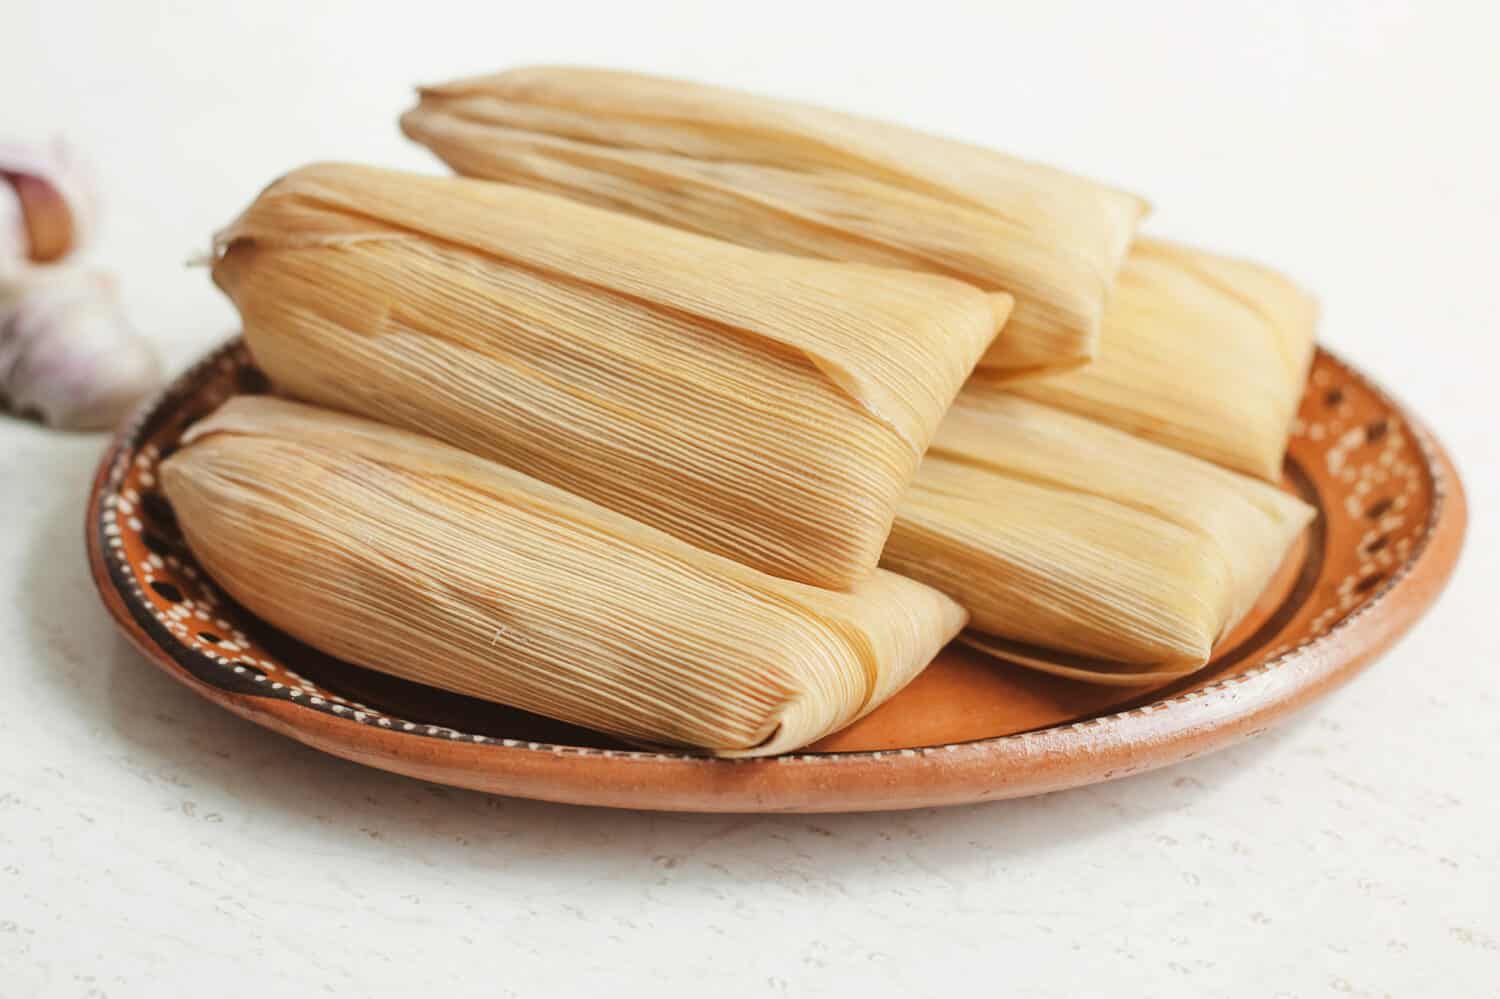 tamales mexicanos, mexican tamale, spicy food in mexico